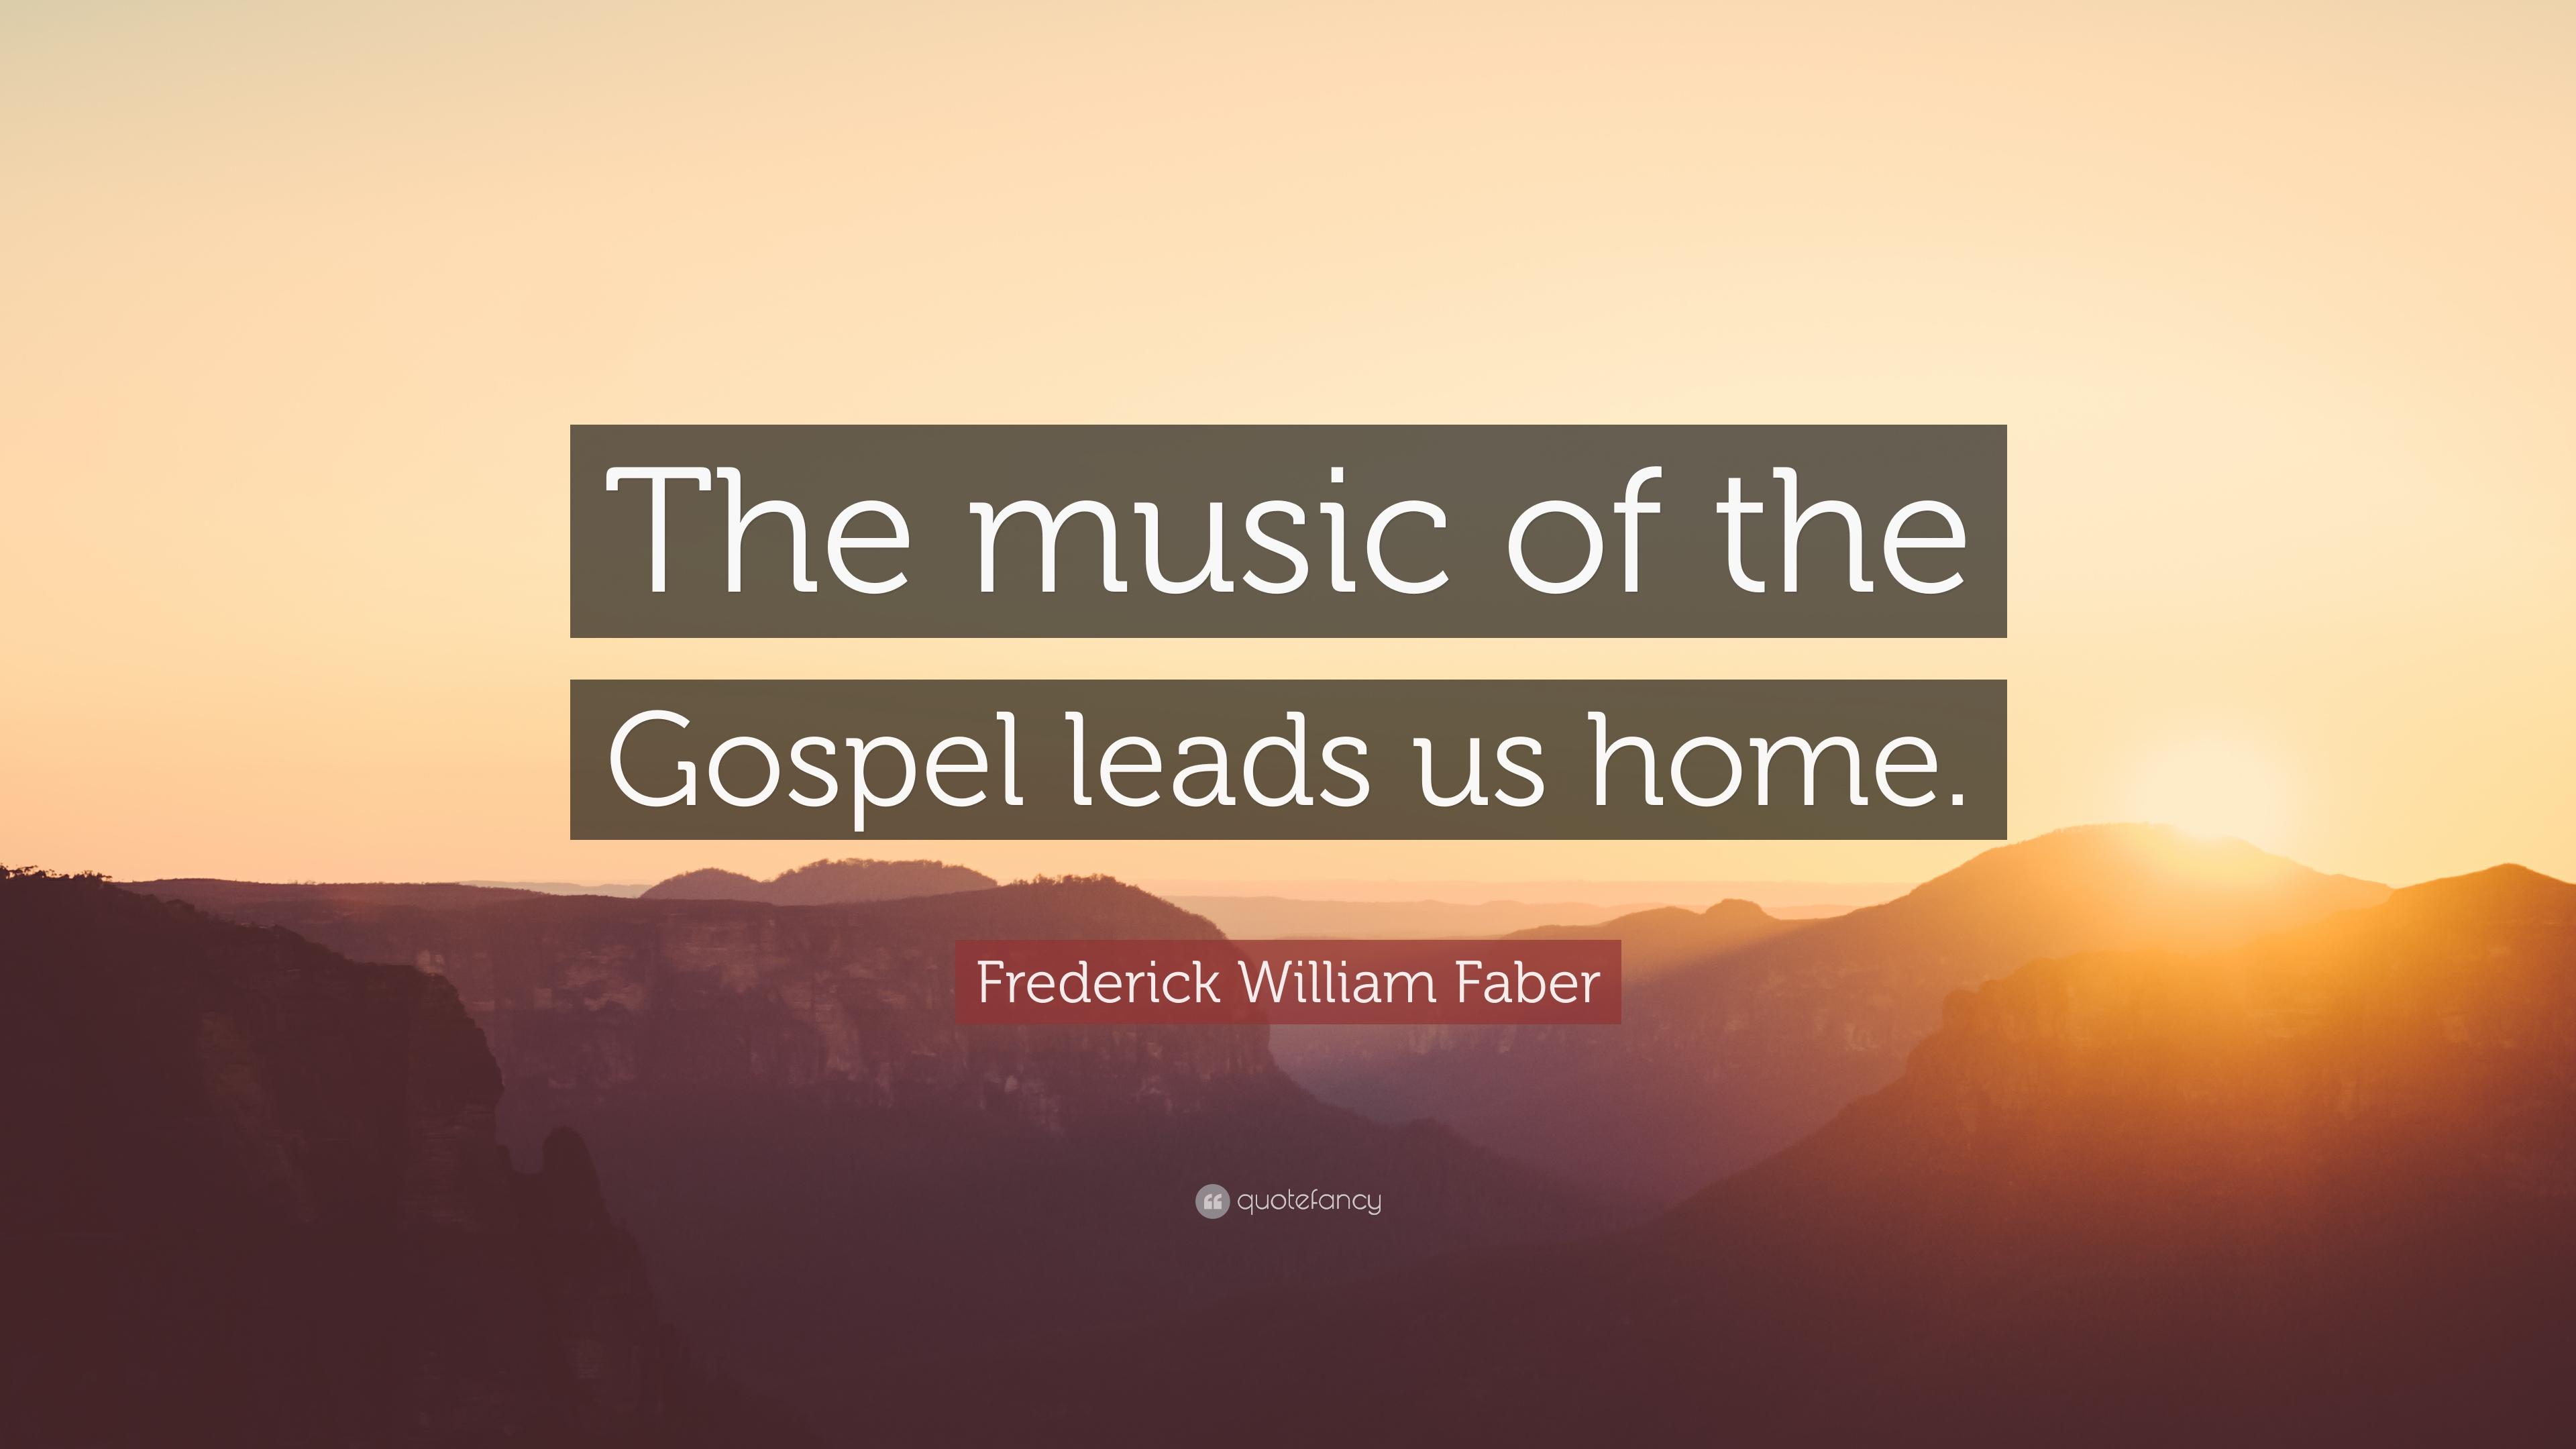 Frederick William Faber Quote: “The music of the Gospel leads us